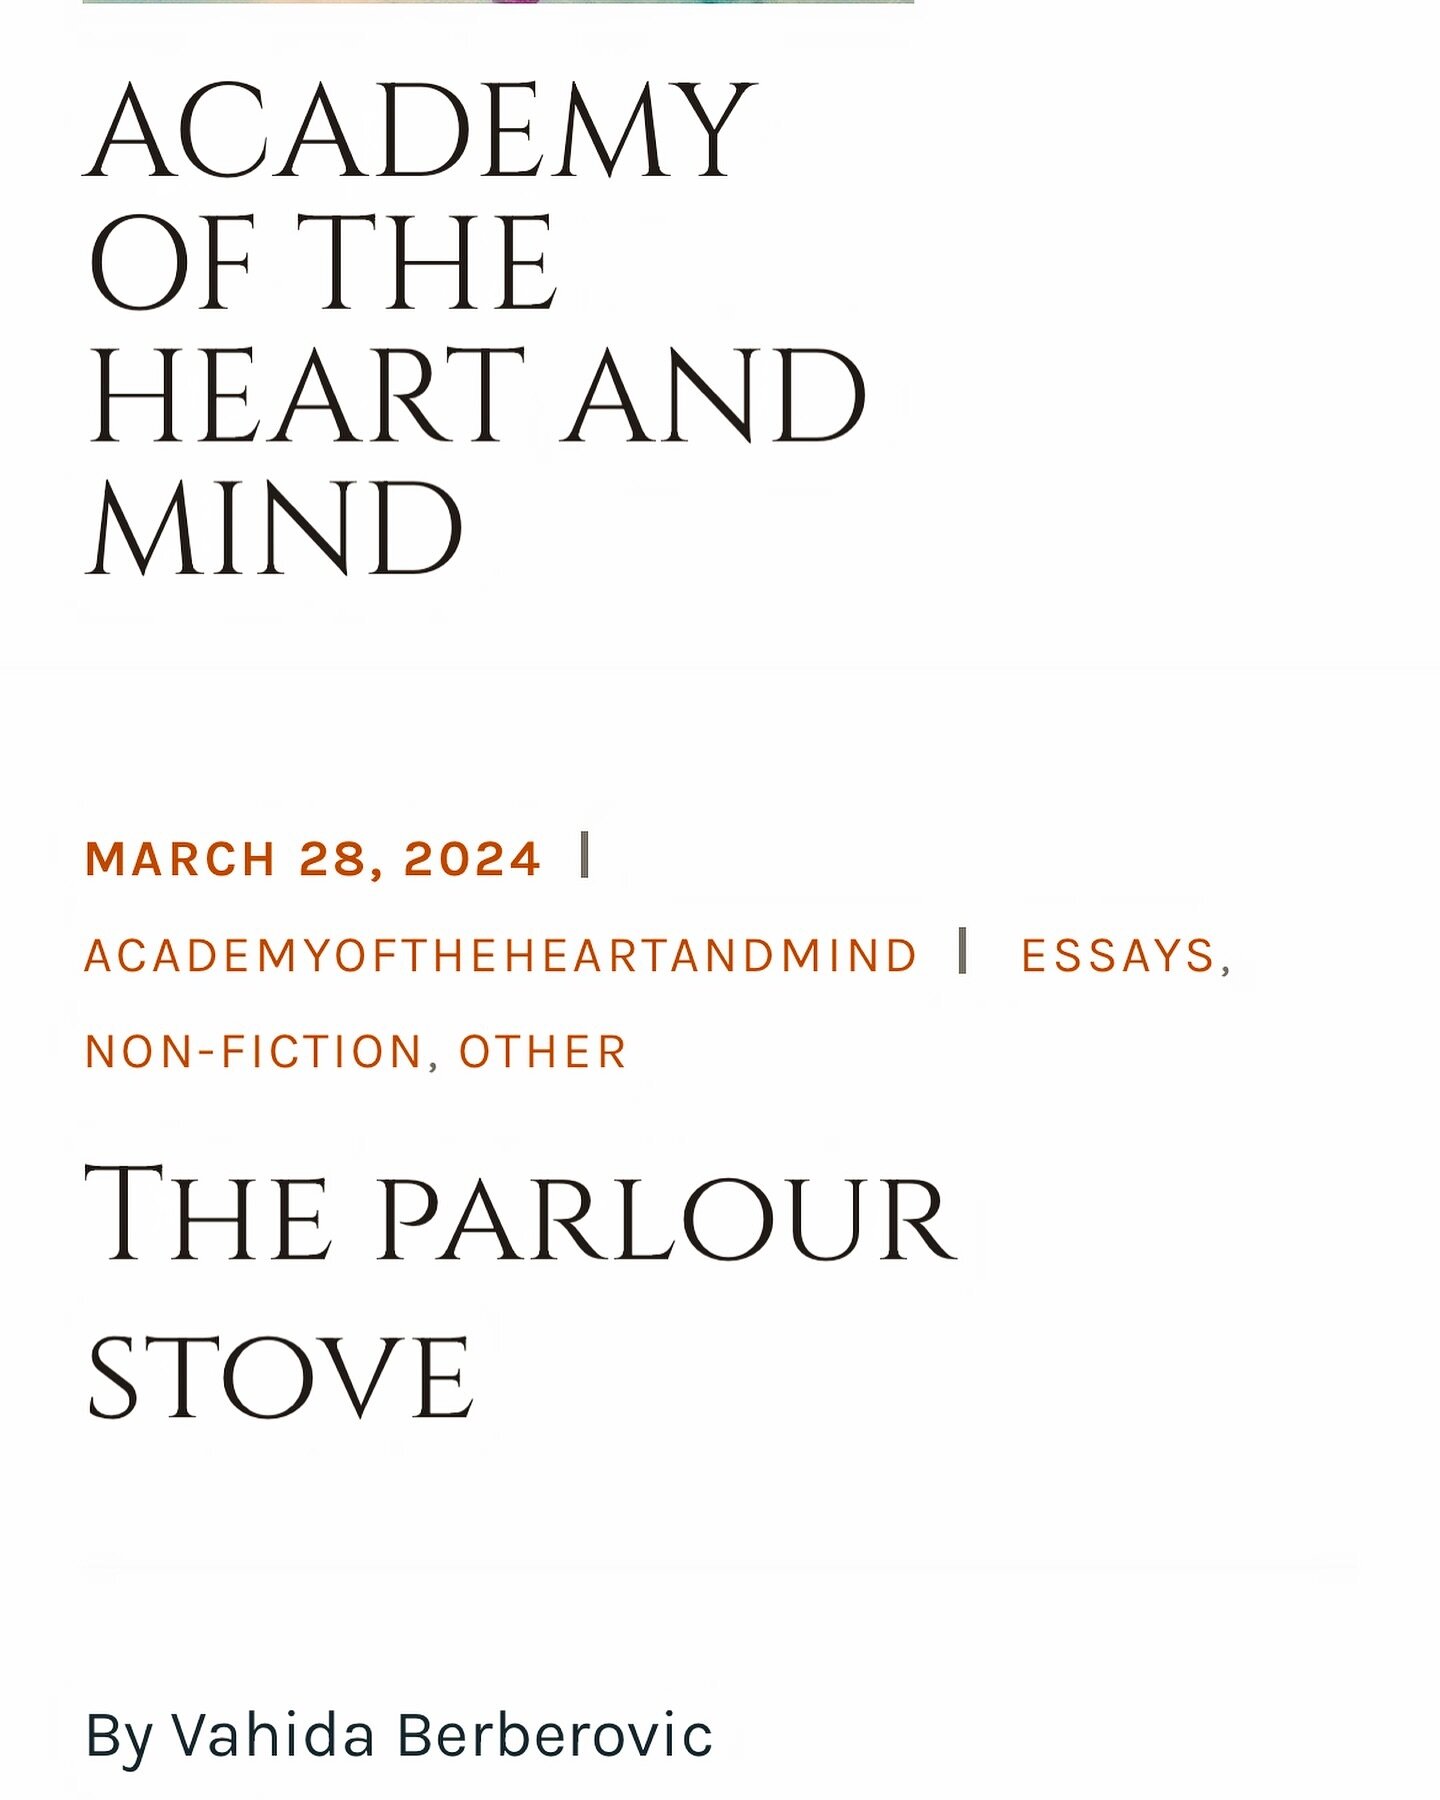 My non-fiction piece &lsquo;The Parlour Stove&rsquo; has been published by Academy of the Heart and Mind. 

It is about how I almost killed myself and my brother. 

If you are a Gen X-er, you will relate to lovingly neglectful parents and the mischie